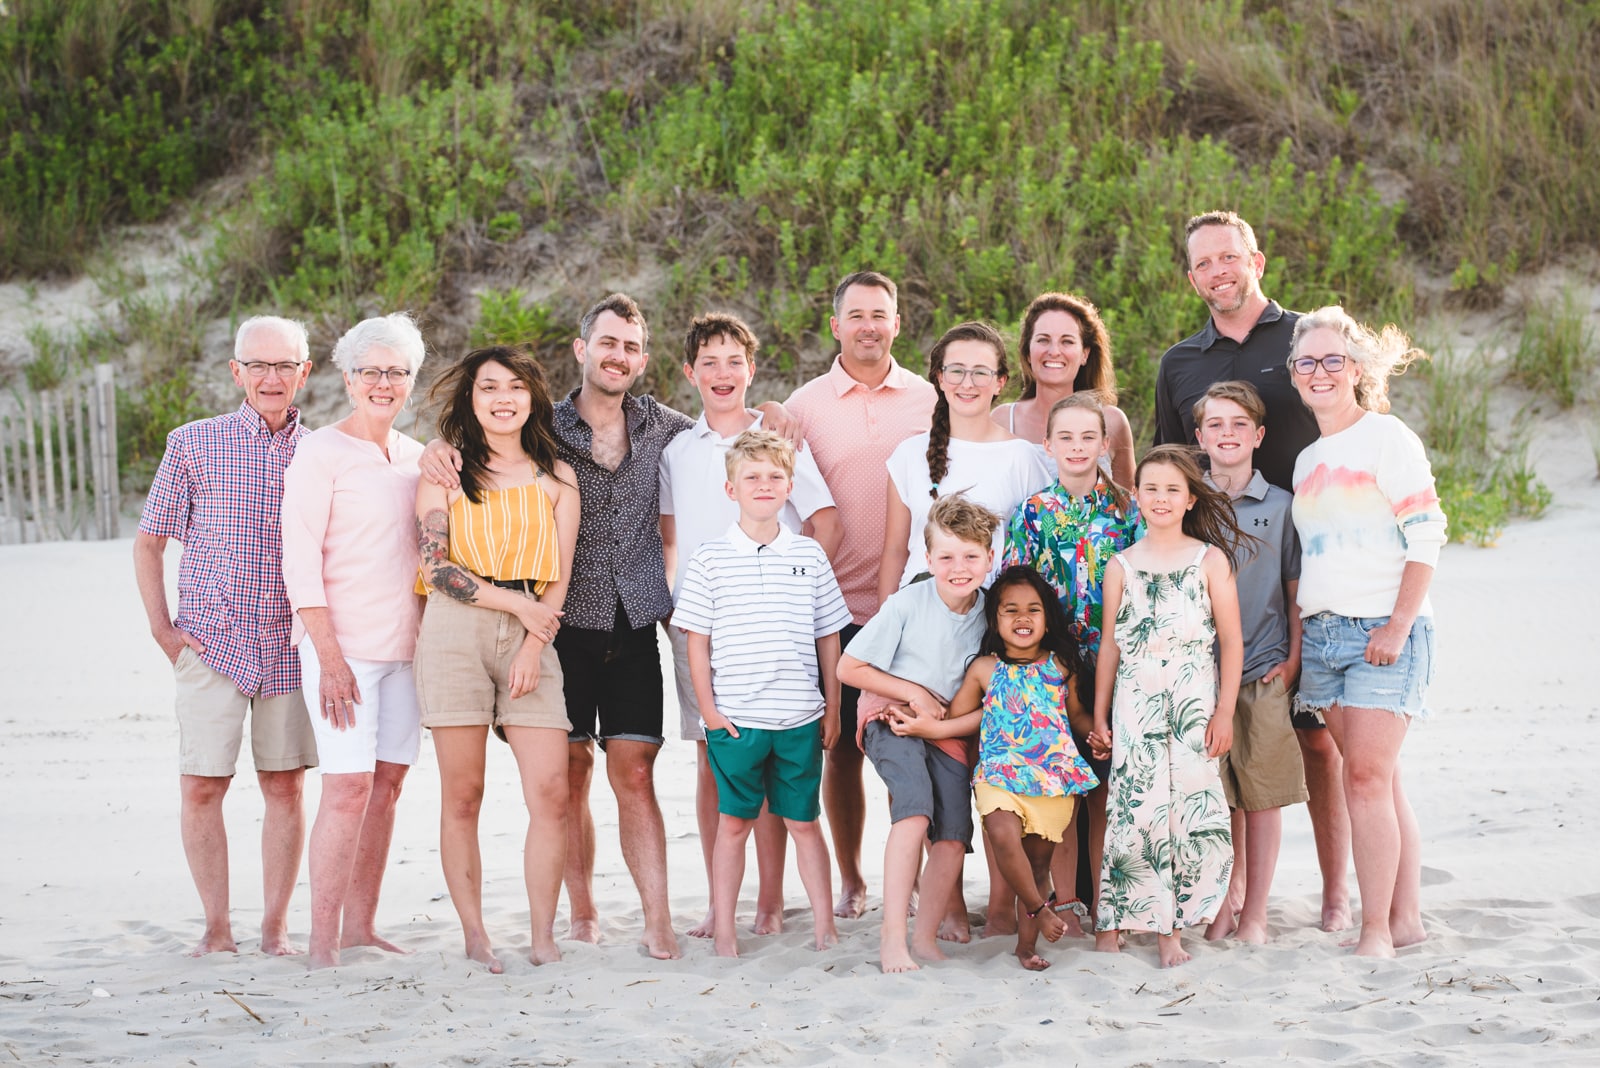 Extended Family Pictures 101: Here are 6 things that will make the process  less stressful